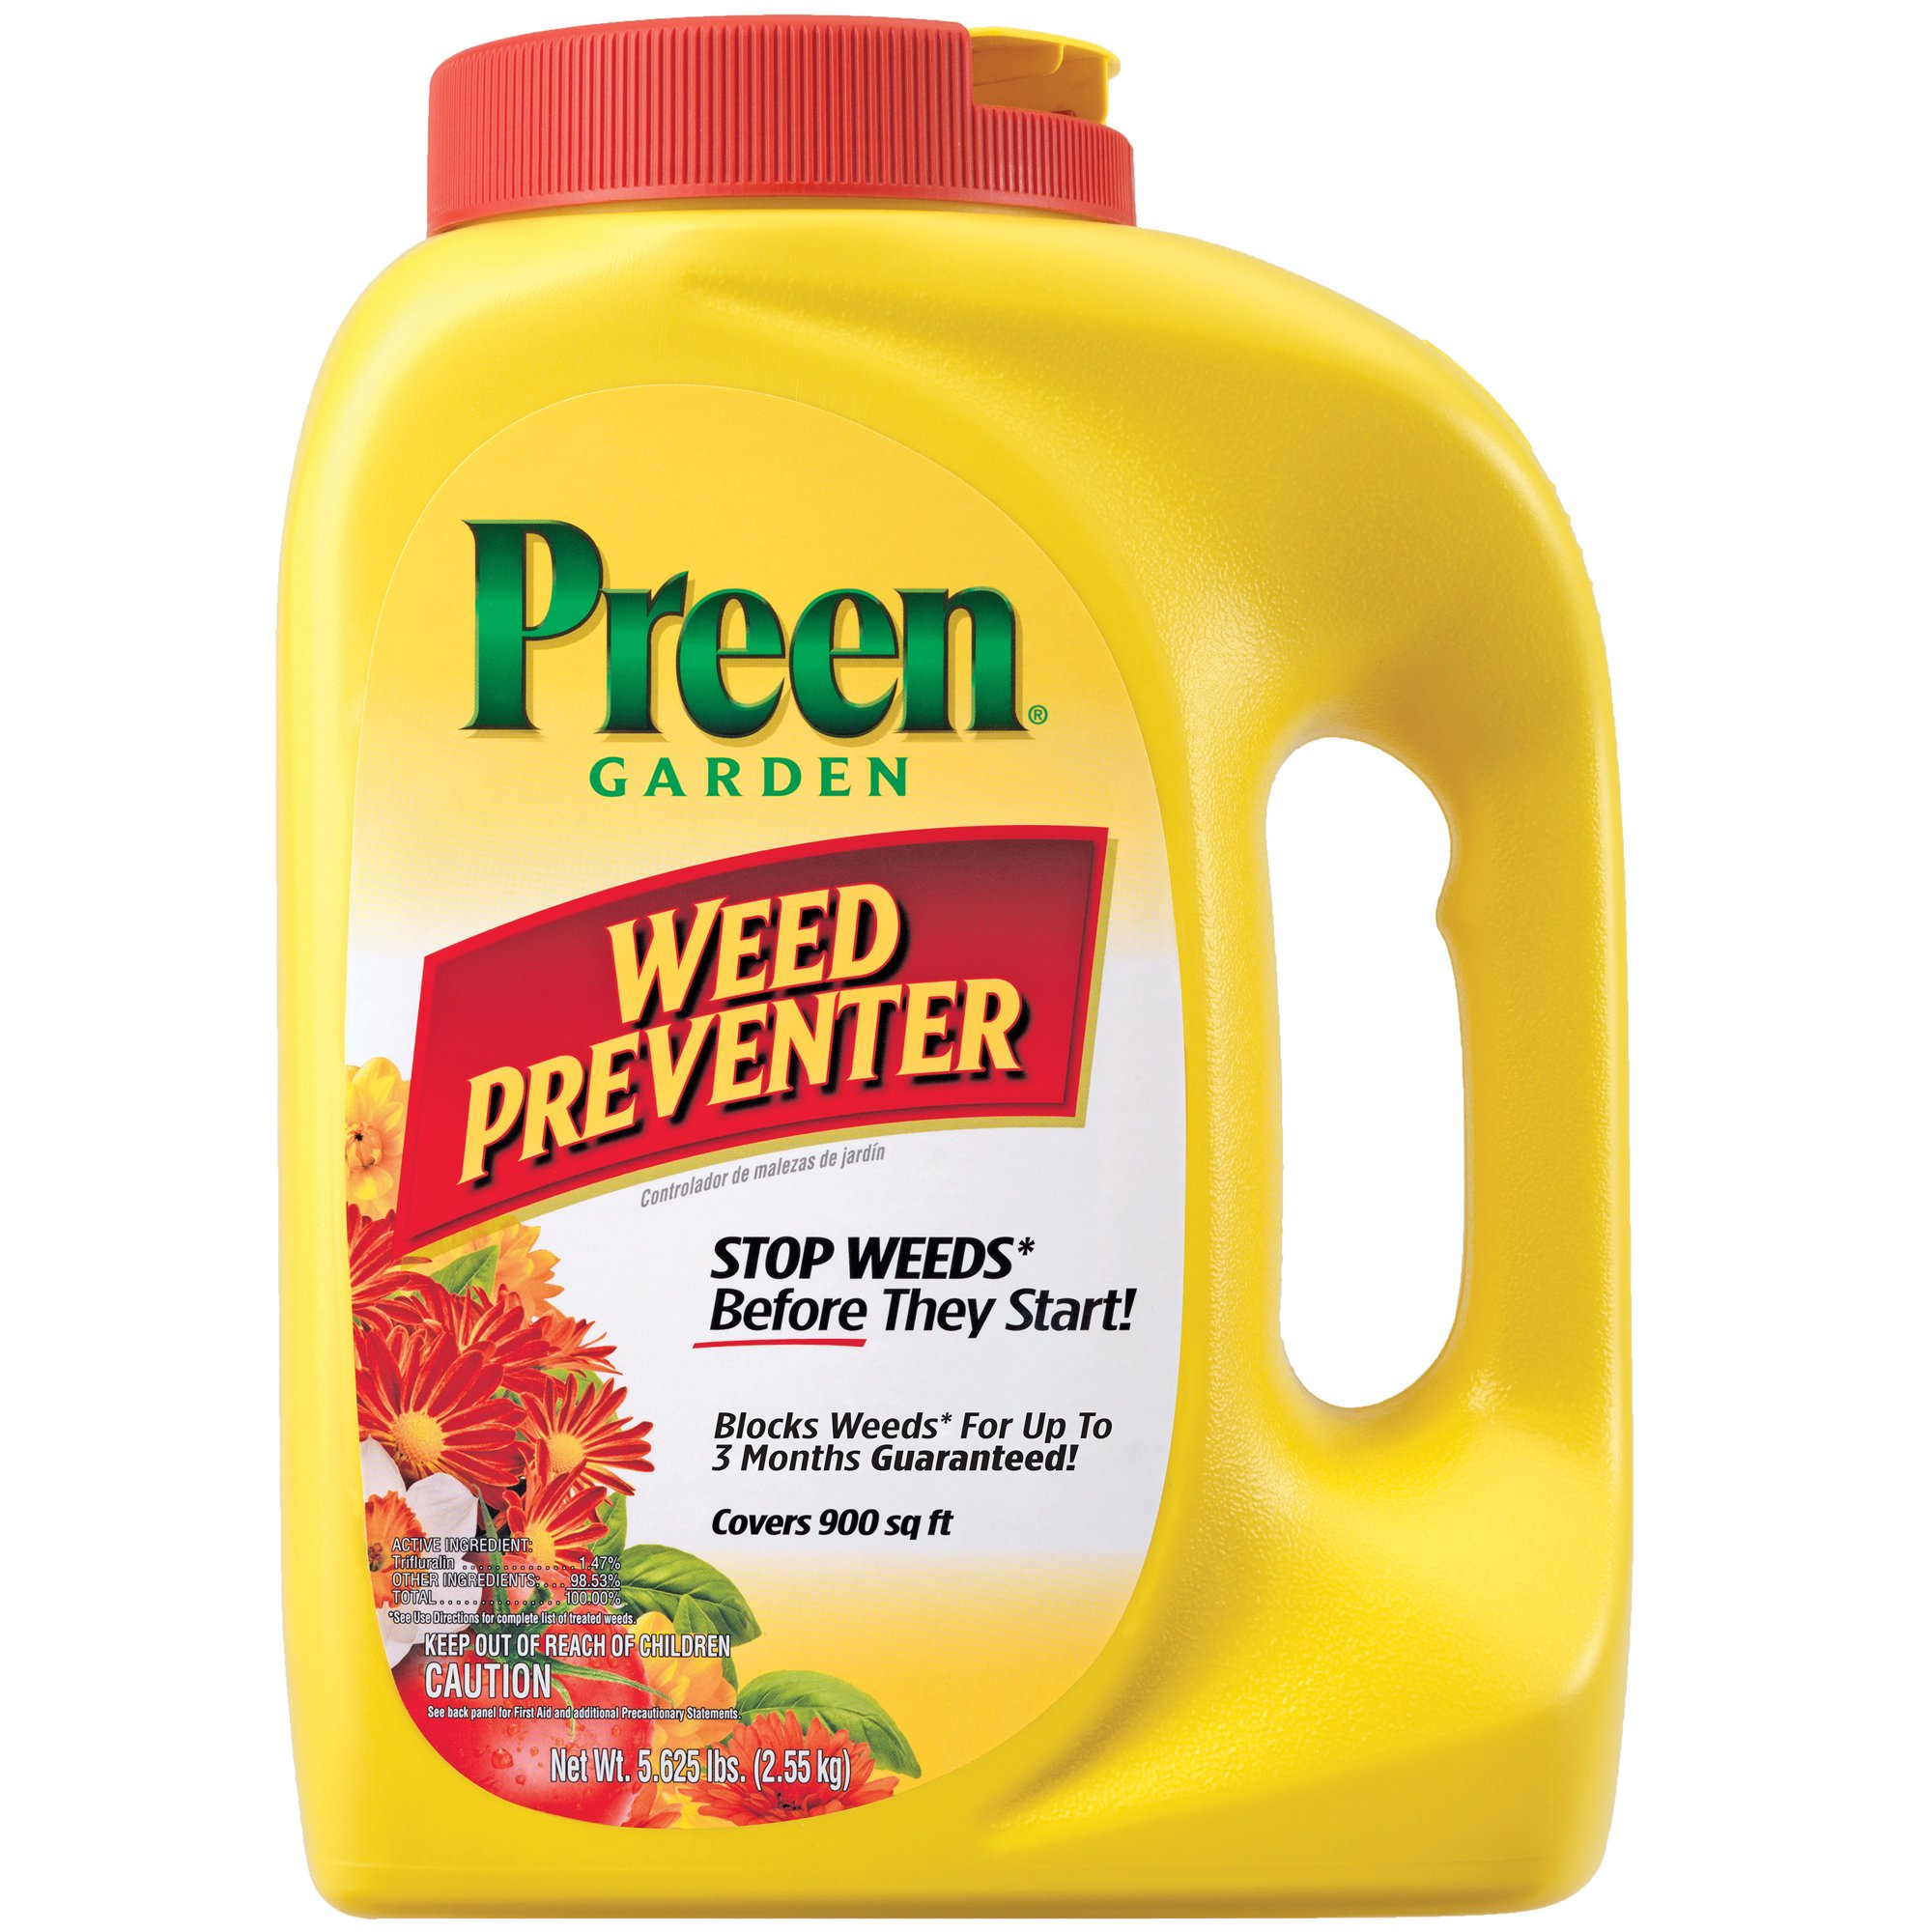 Preen Garden Weed Preventer Items at Walmart B&M Clearance from $3.24YMMV